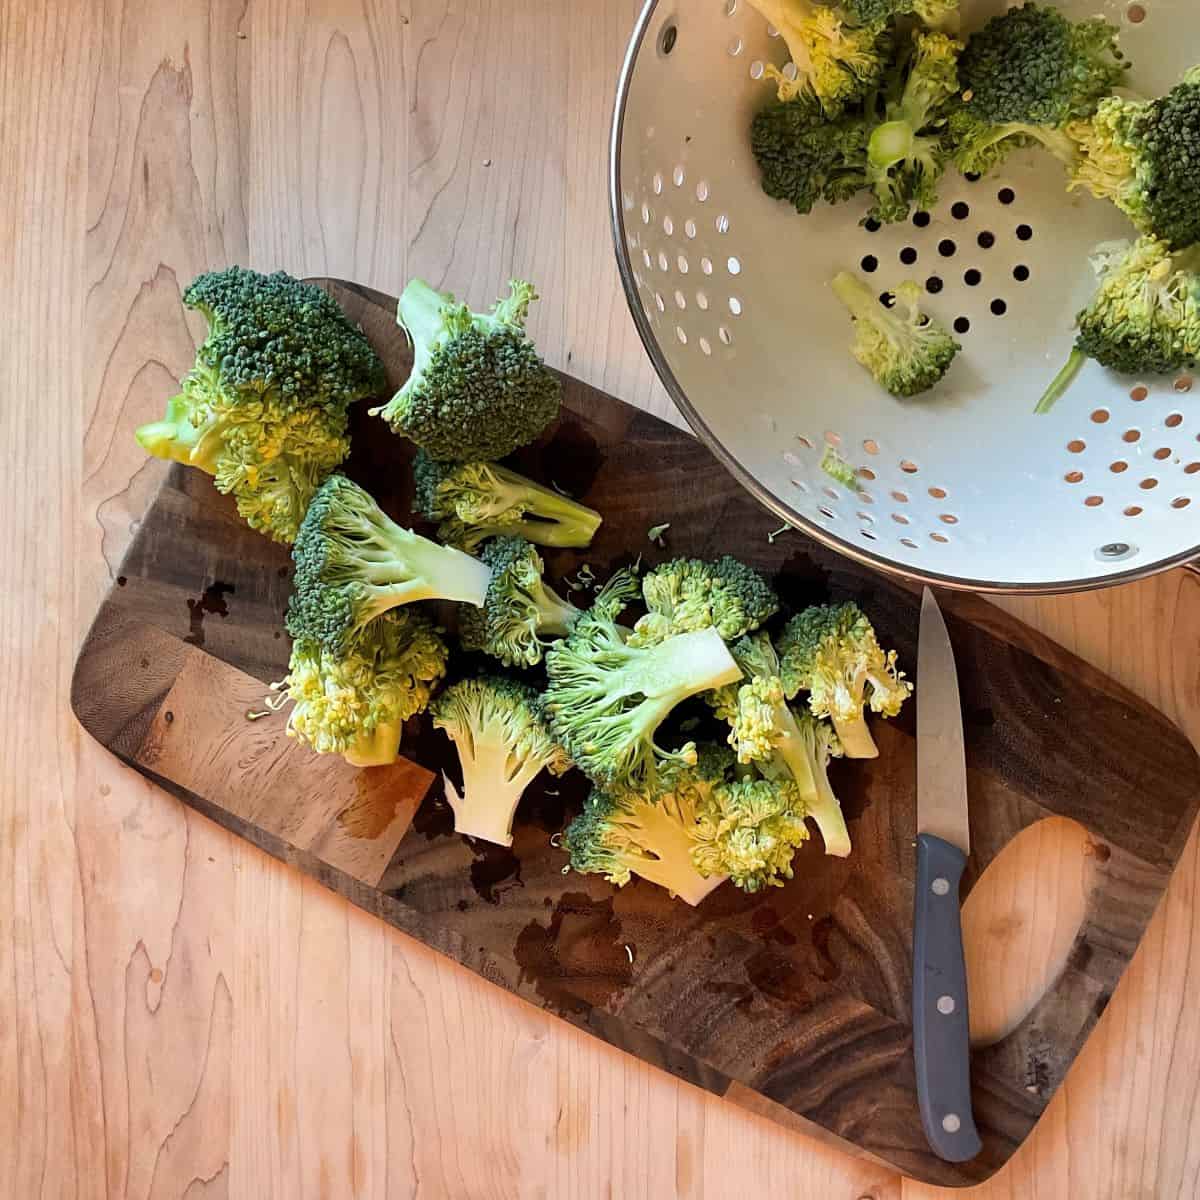 Cut up broccoli on a wooden board.